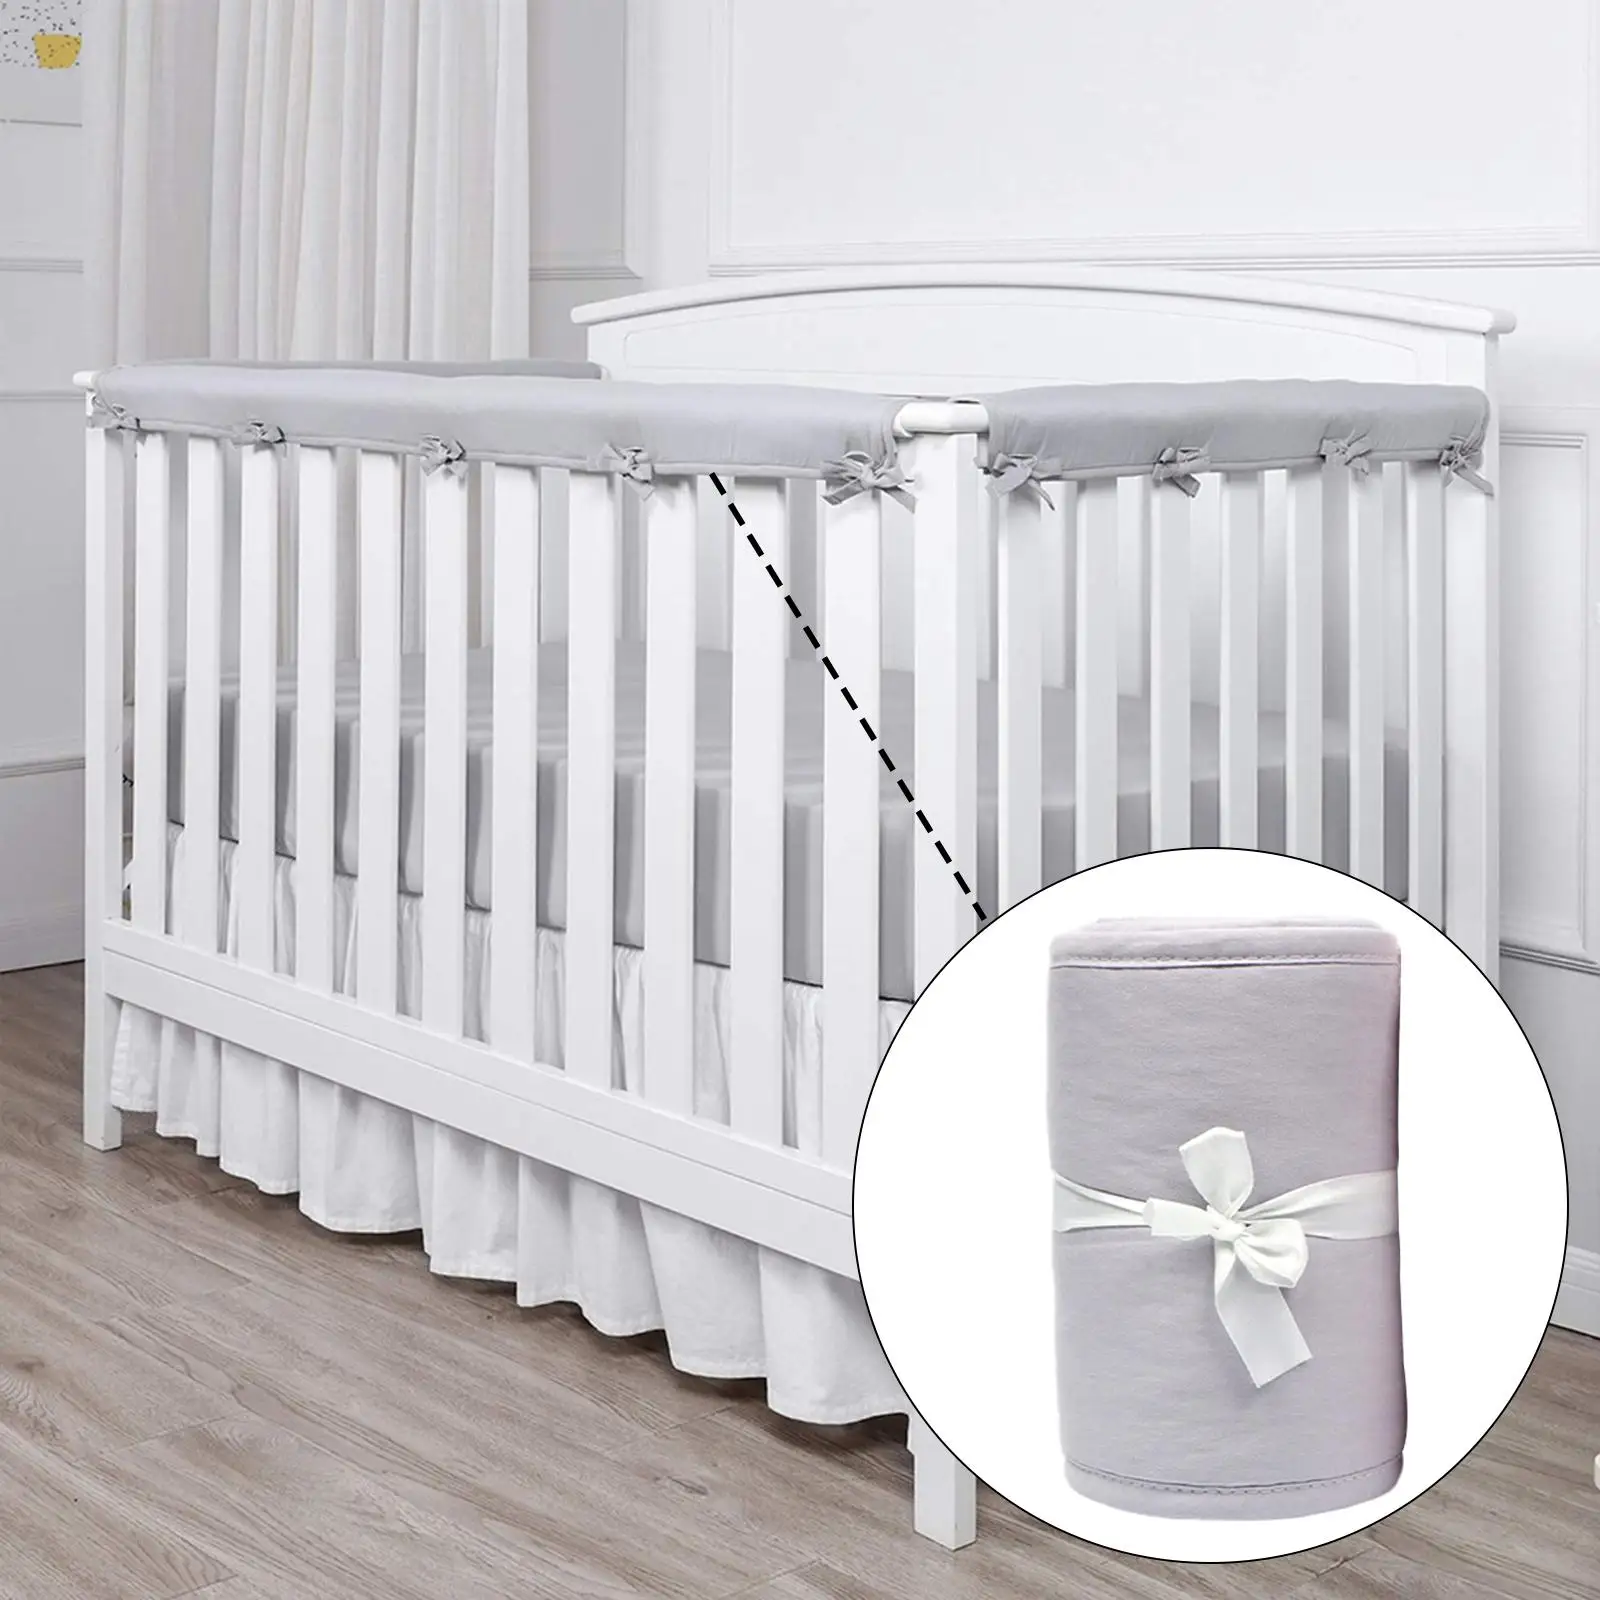 Cotton Baby Crib Rail Cover Baby Safety Products 3Pcs for Infants Toddlers